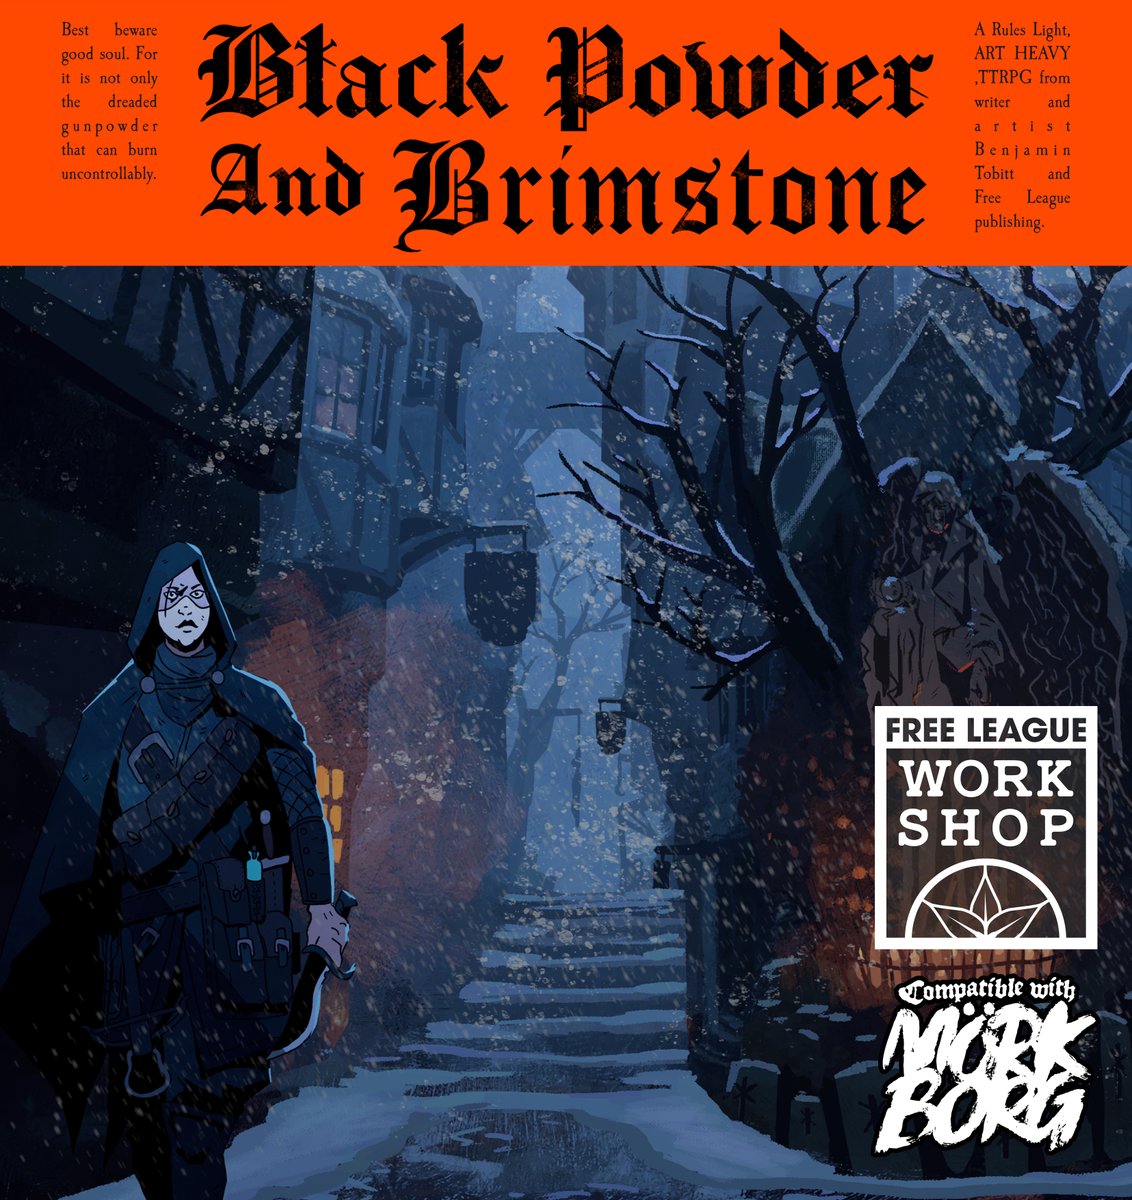 Back Black Powder and Brimstone today! A rules light, art heavy TTRPG based on the Mörk Borg system. This game was a labour of love, and I cant wait to share this with the world. So please either back or spread th word so I can make it the best it can be.